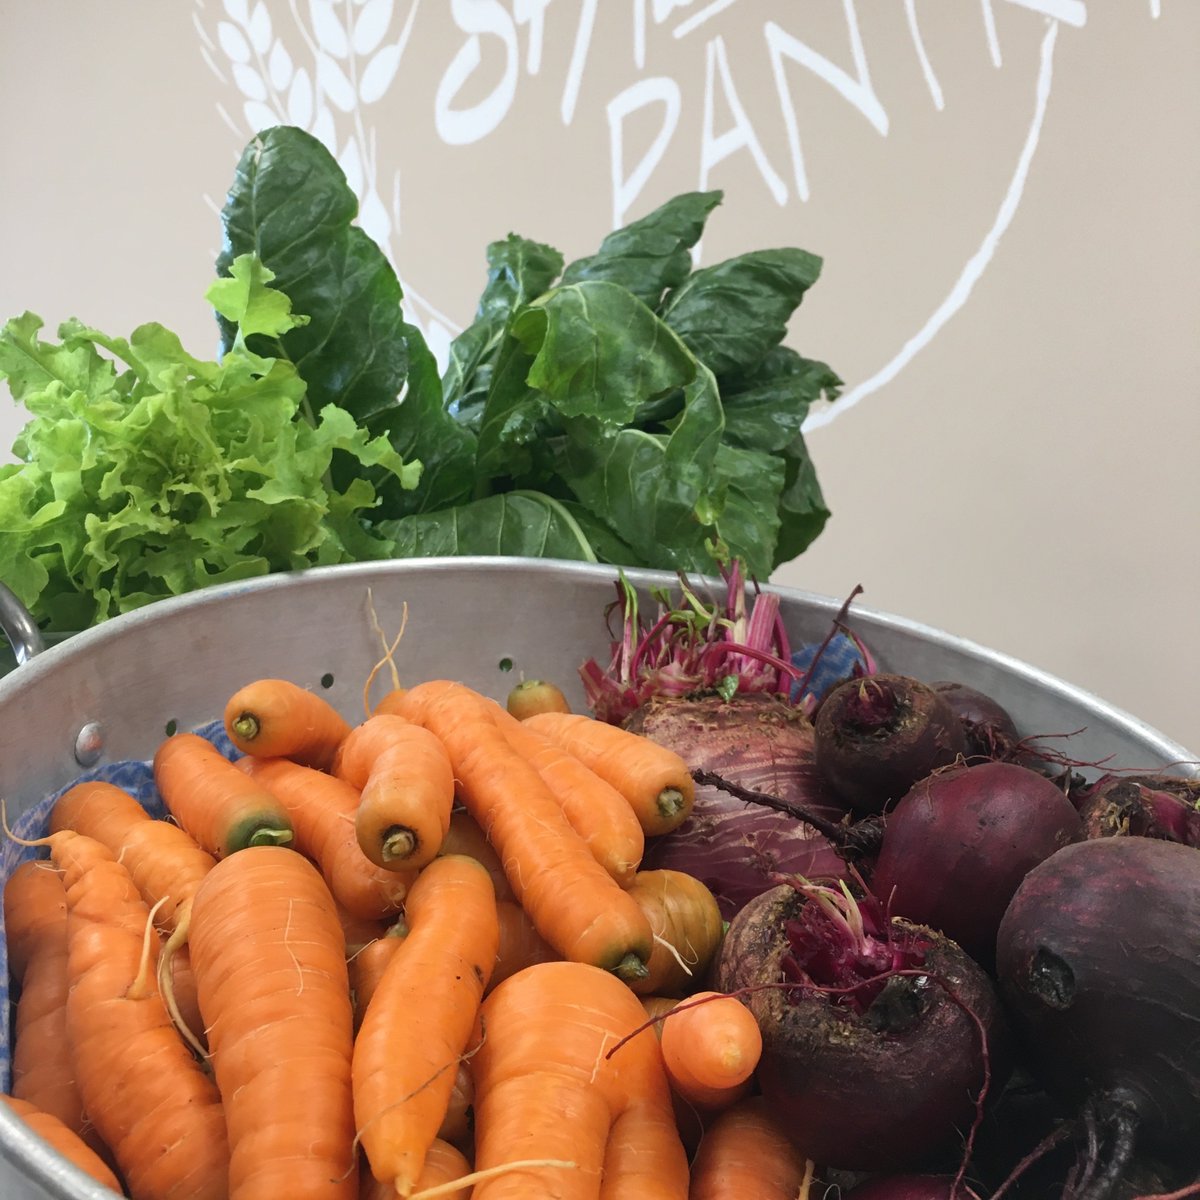 If you live in #StMellons & are trying to make your money go further, get in touch to find out about our Pantry. We have good quality surplus food from @FareShareCymru & our local food suppliers, as well as veg from our own garden! #GoodFoodCardiff #FoodCardiff #EdibleCardiff